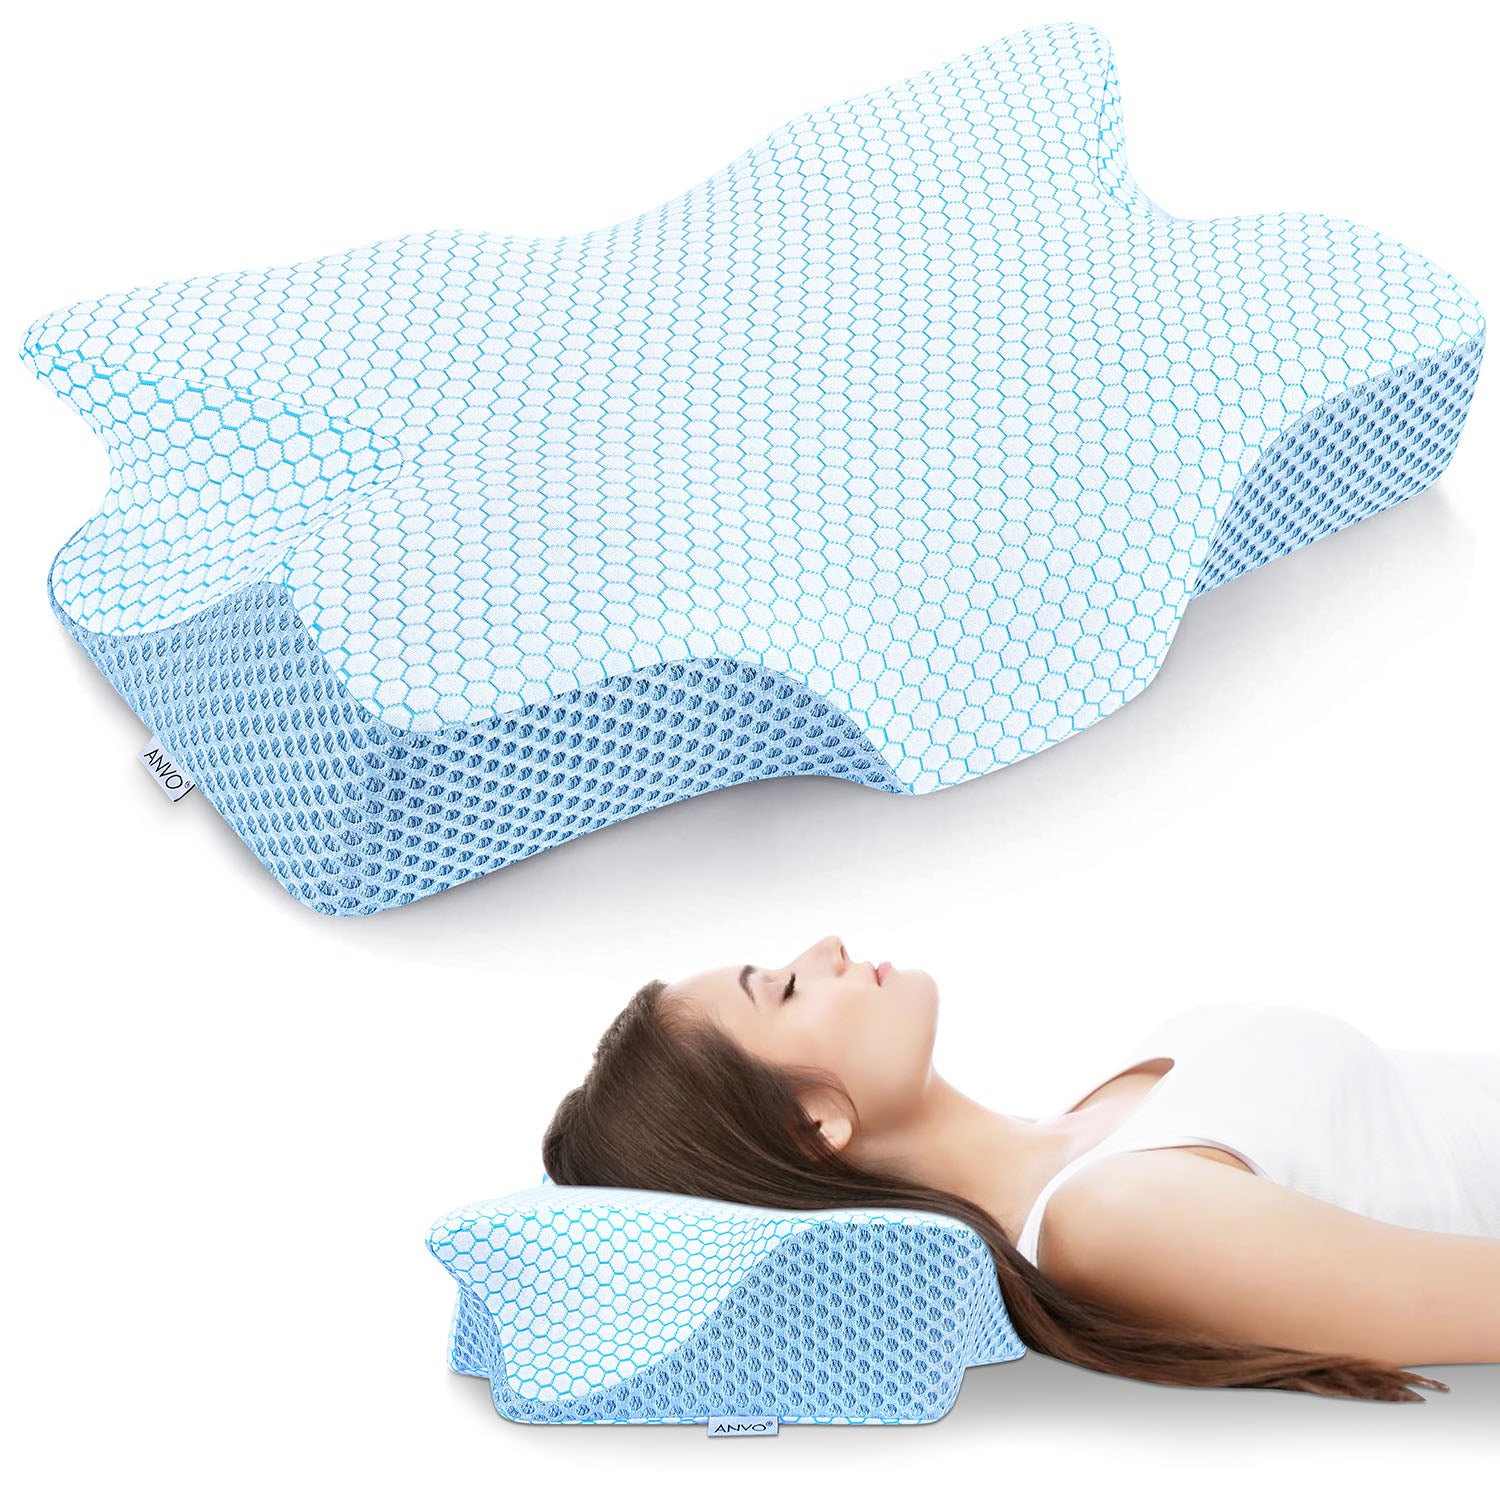 Cervical Neck Pillows for Pain Relief Sleeping, Ergonomic Built-in